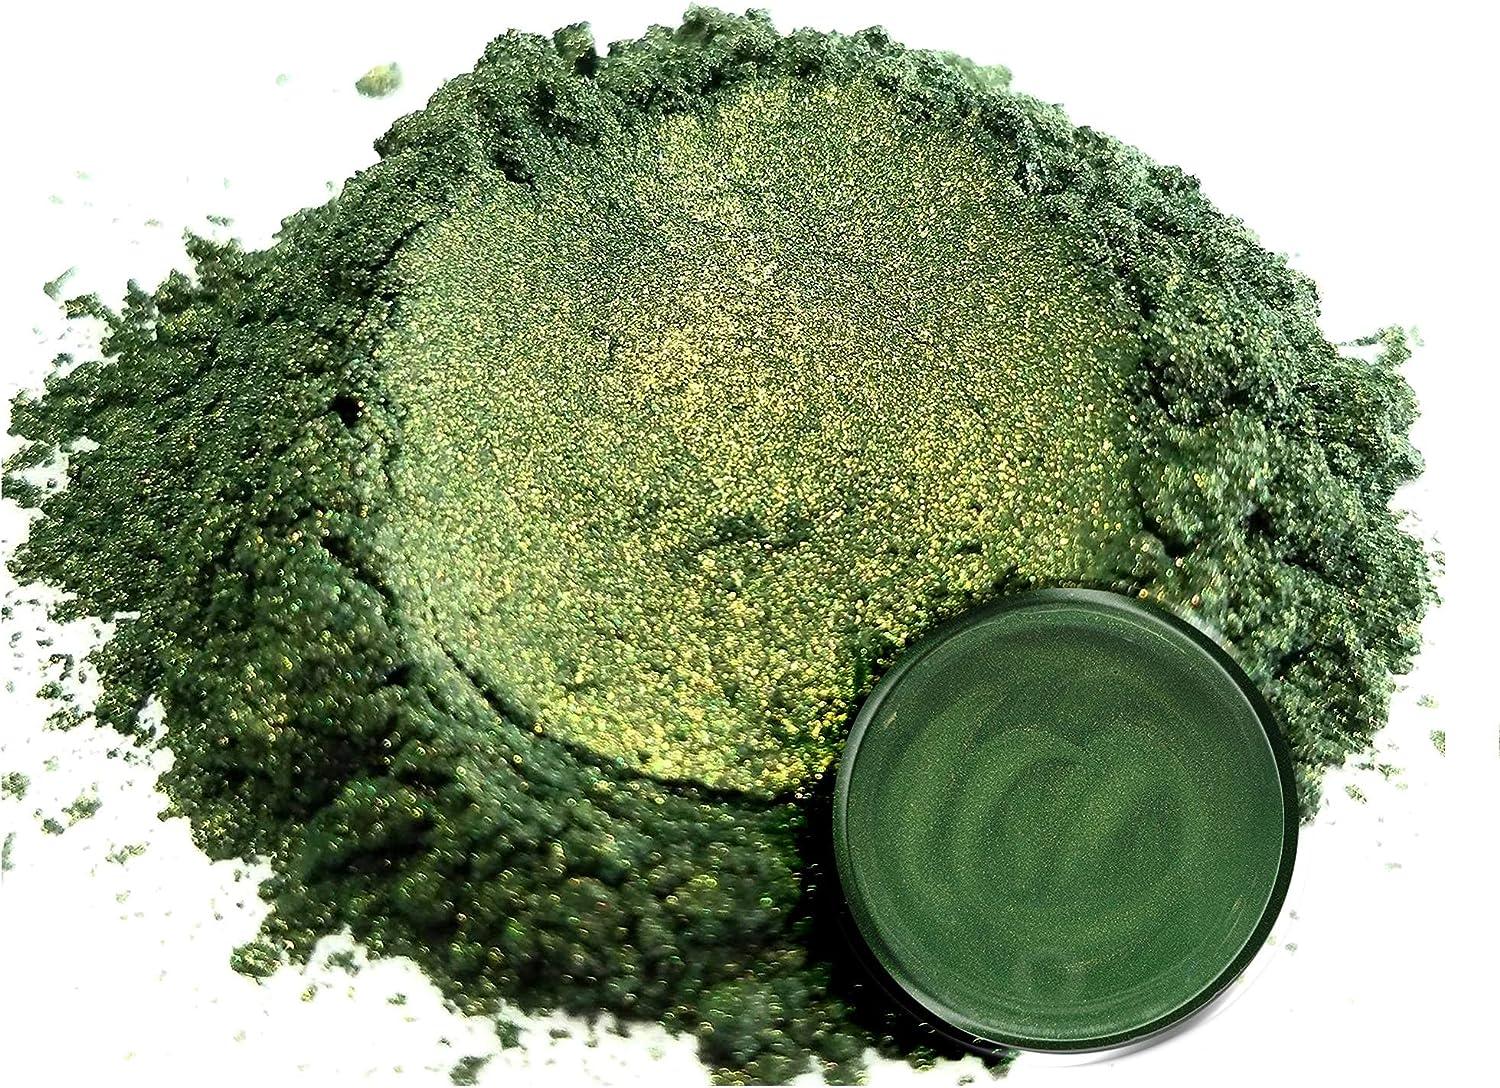 Eye Candy Mica Powder Pigment Nebula Green (25g) Multipurpose DIY Arts and Crafts Additive | Woodworking, Natural Bath Bombs, Resin, Paint, Epoxy, Soap, Nail